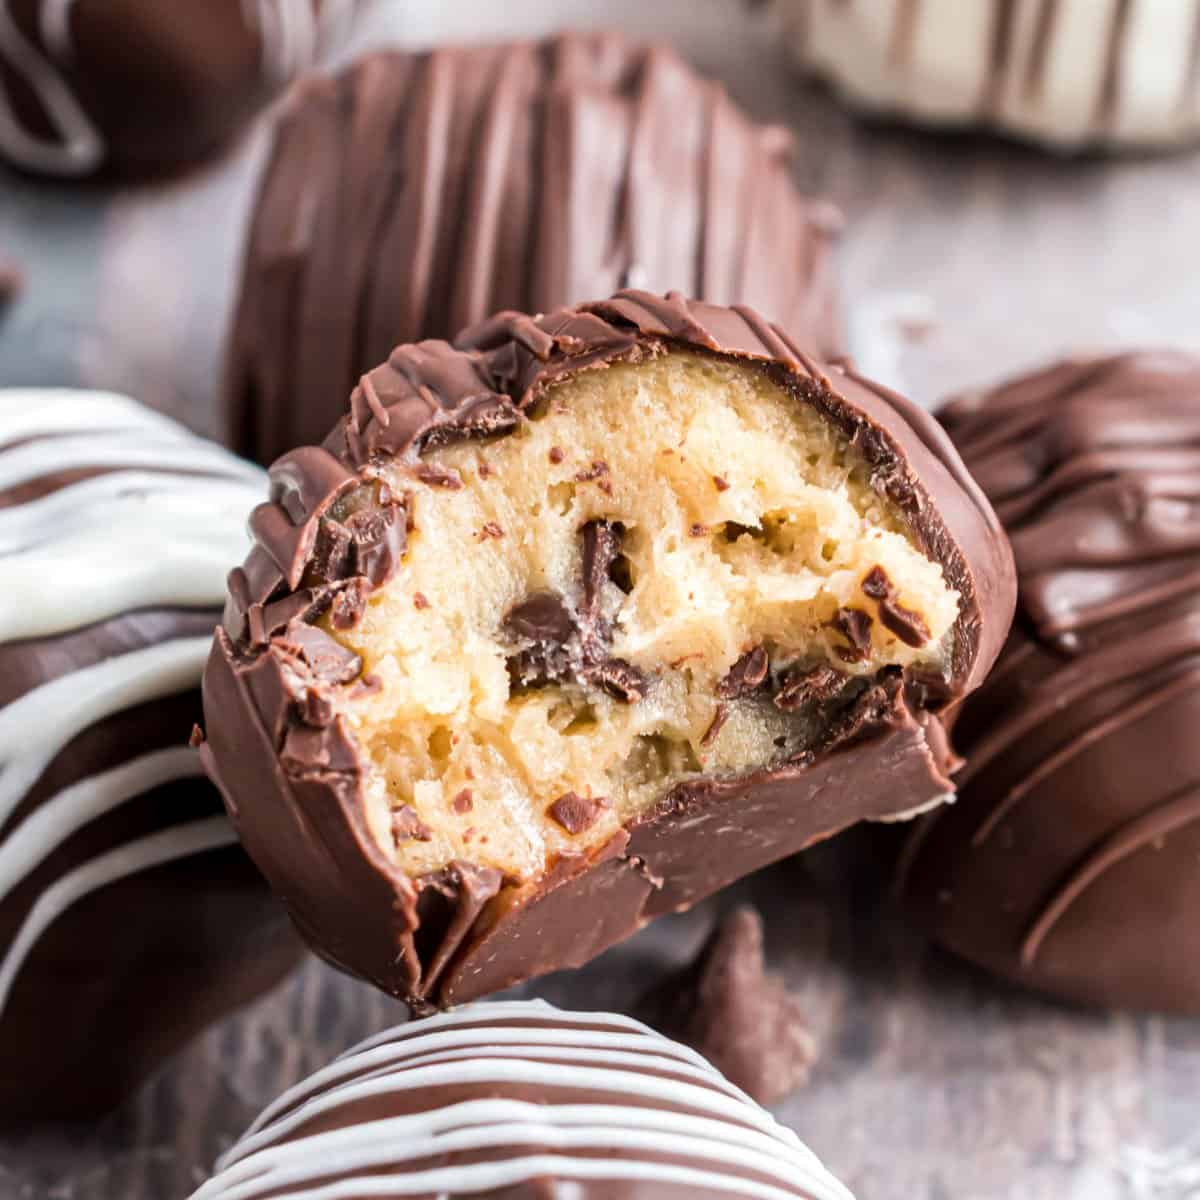 Cookie dough truffles dipped in chocolate with a bite taken out.